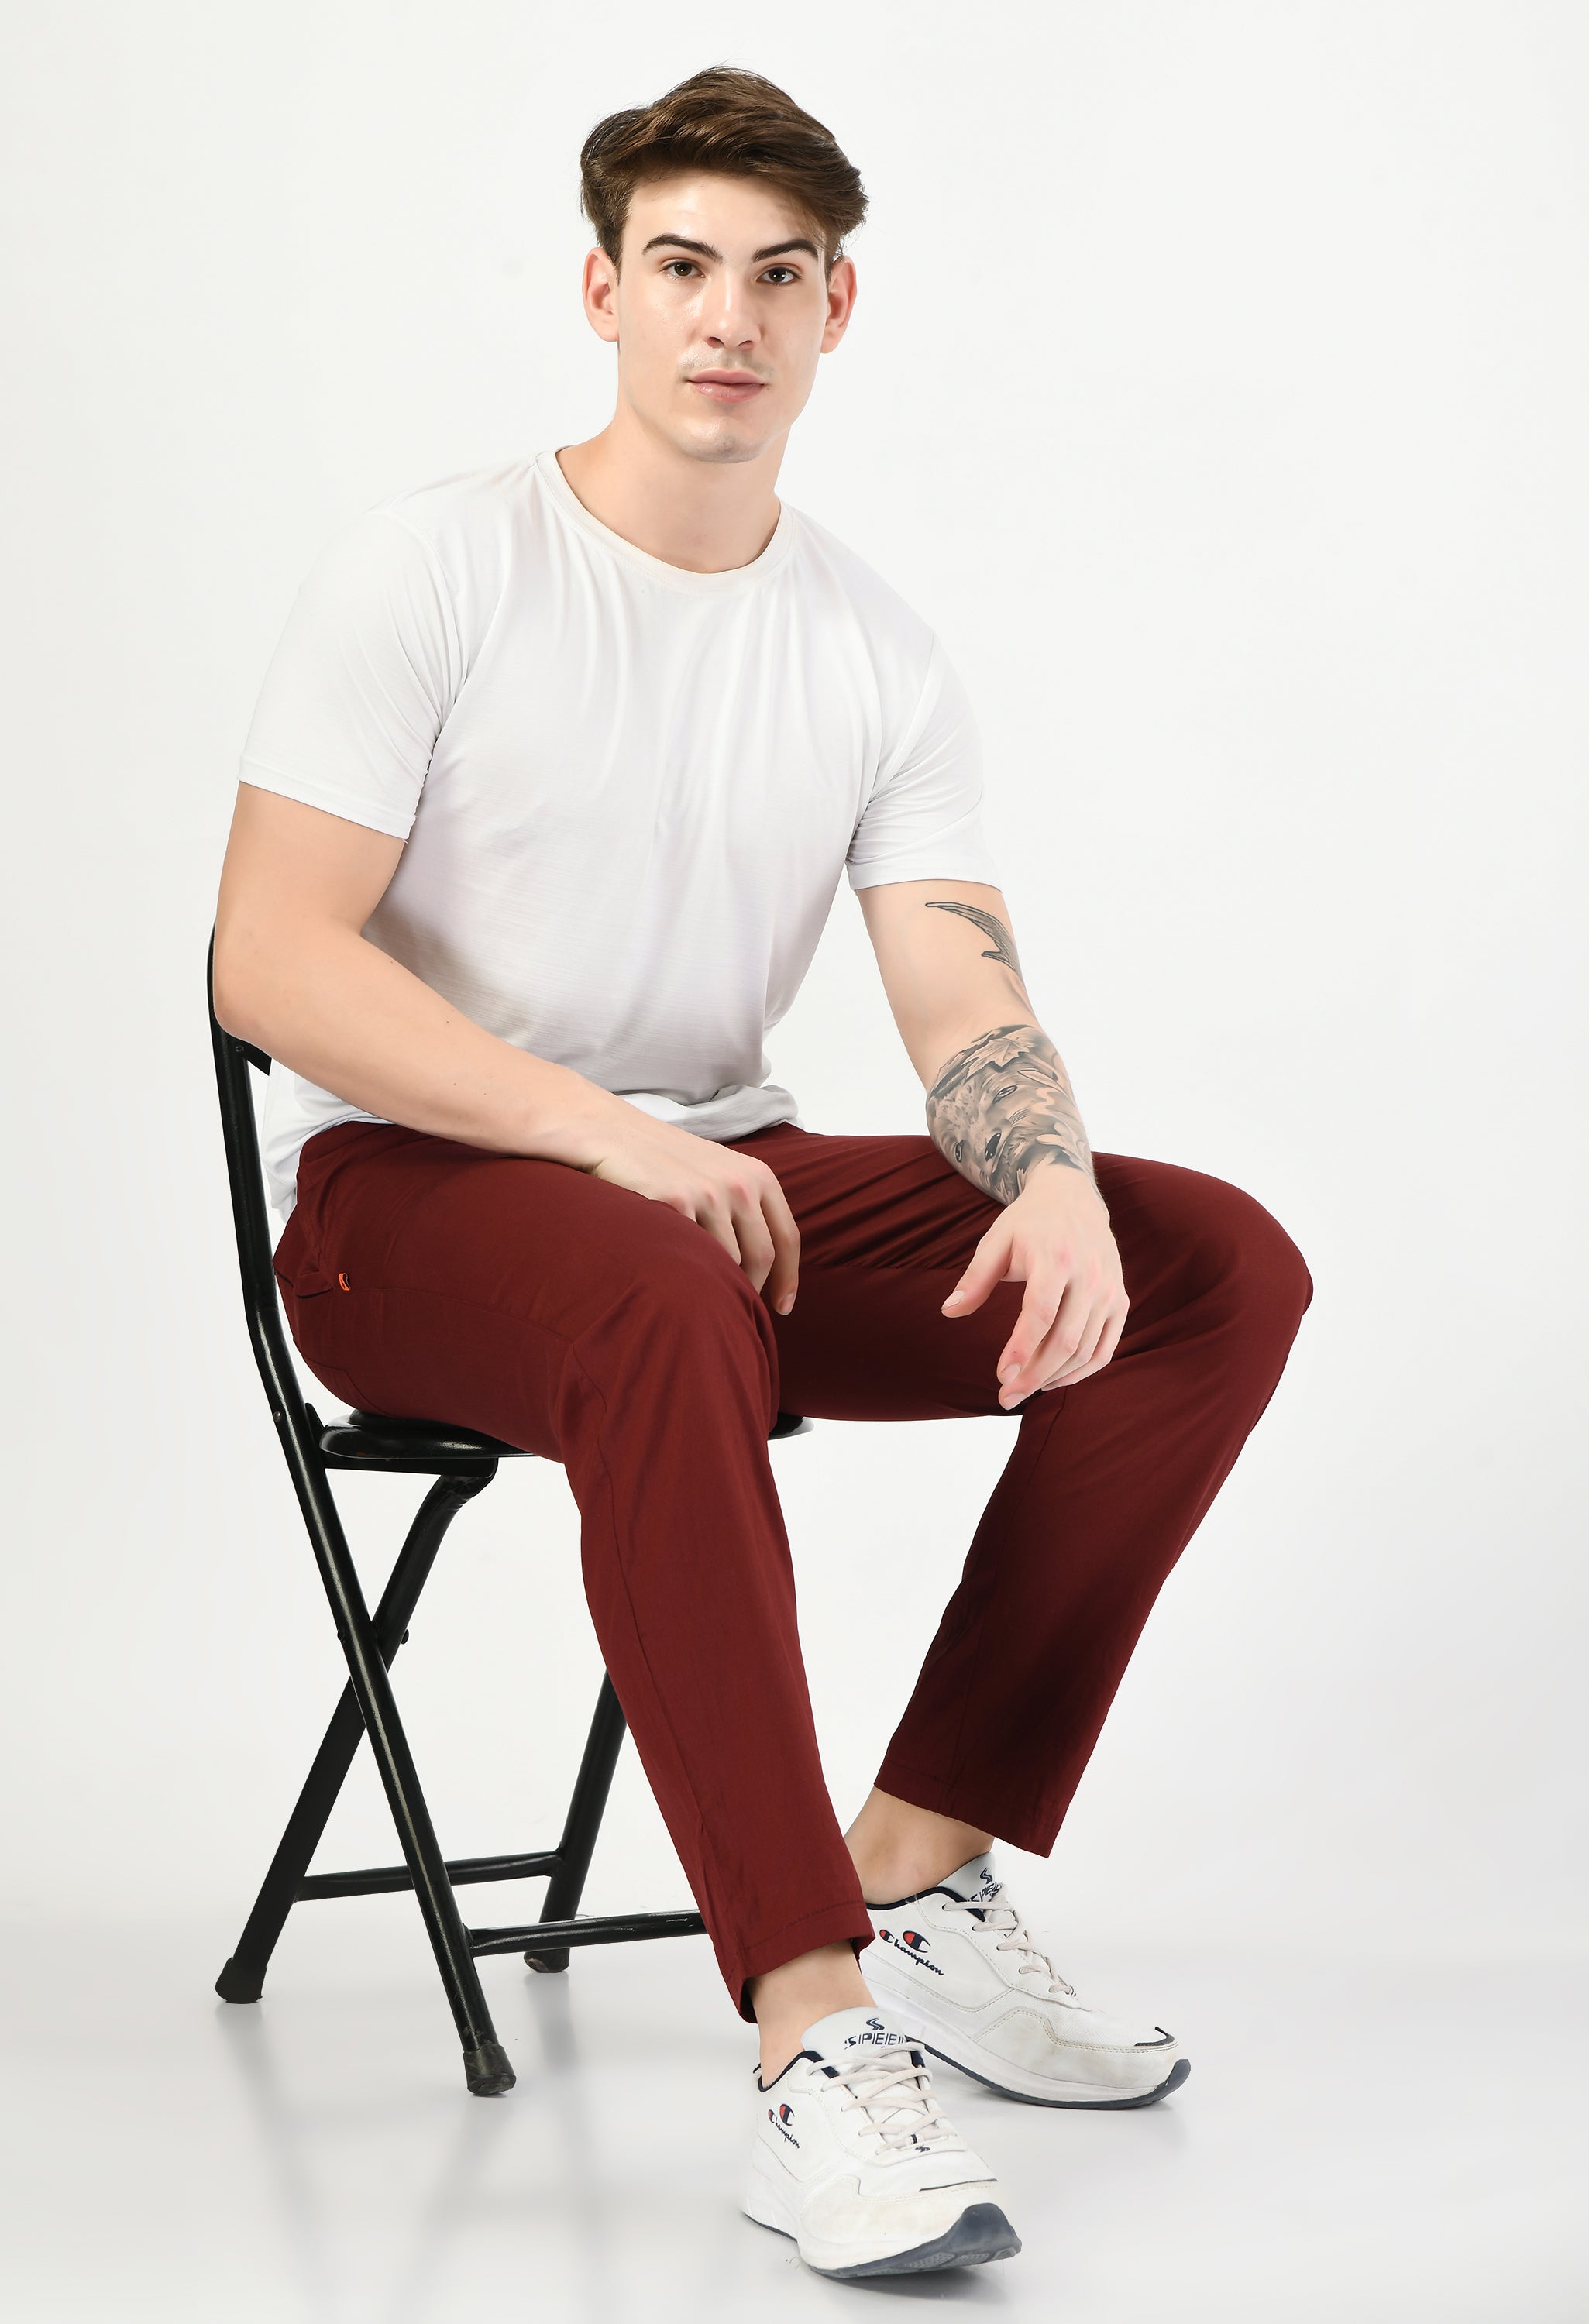 Solid Cotton Twill Relaxed Fit Men's Trouser - Marron - SQUIREHOOD